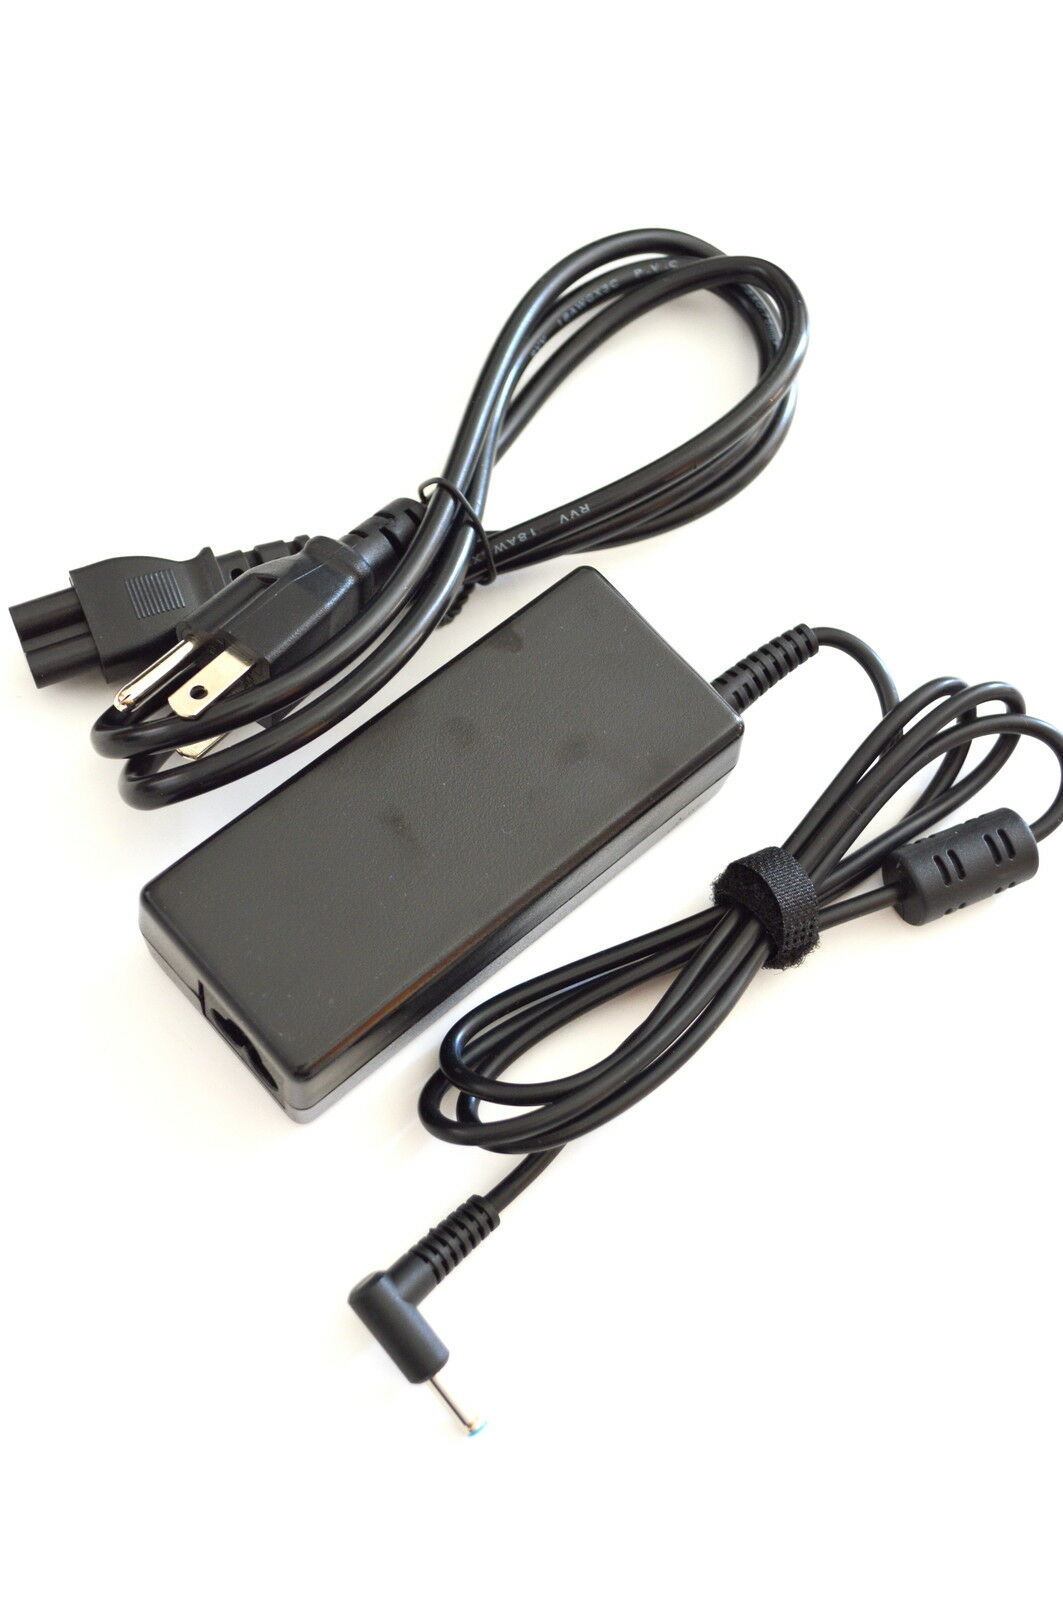 Primary image for AC Adapter Charger For HP L8S90AV_1,HP M1V67UA, HP L8U93UA,HP M1W11UA,HP M7D88AV